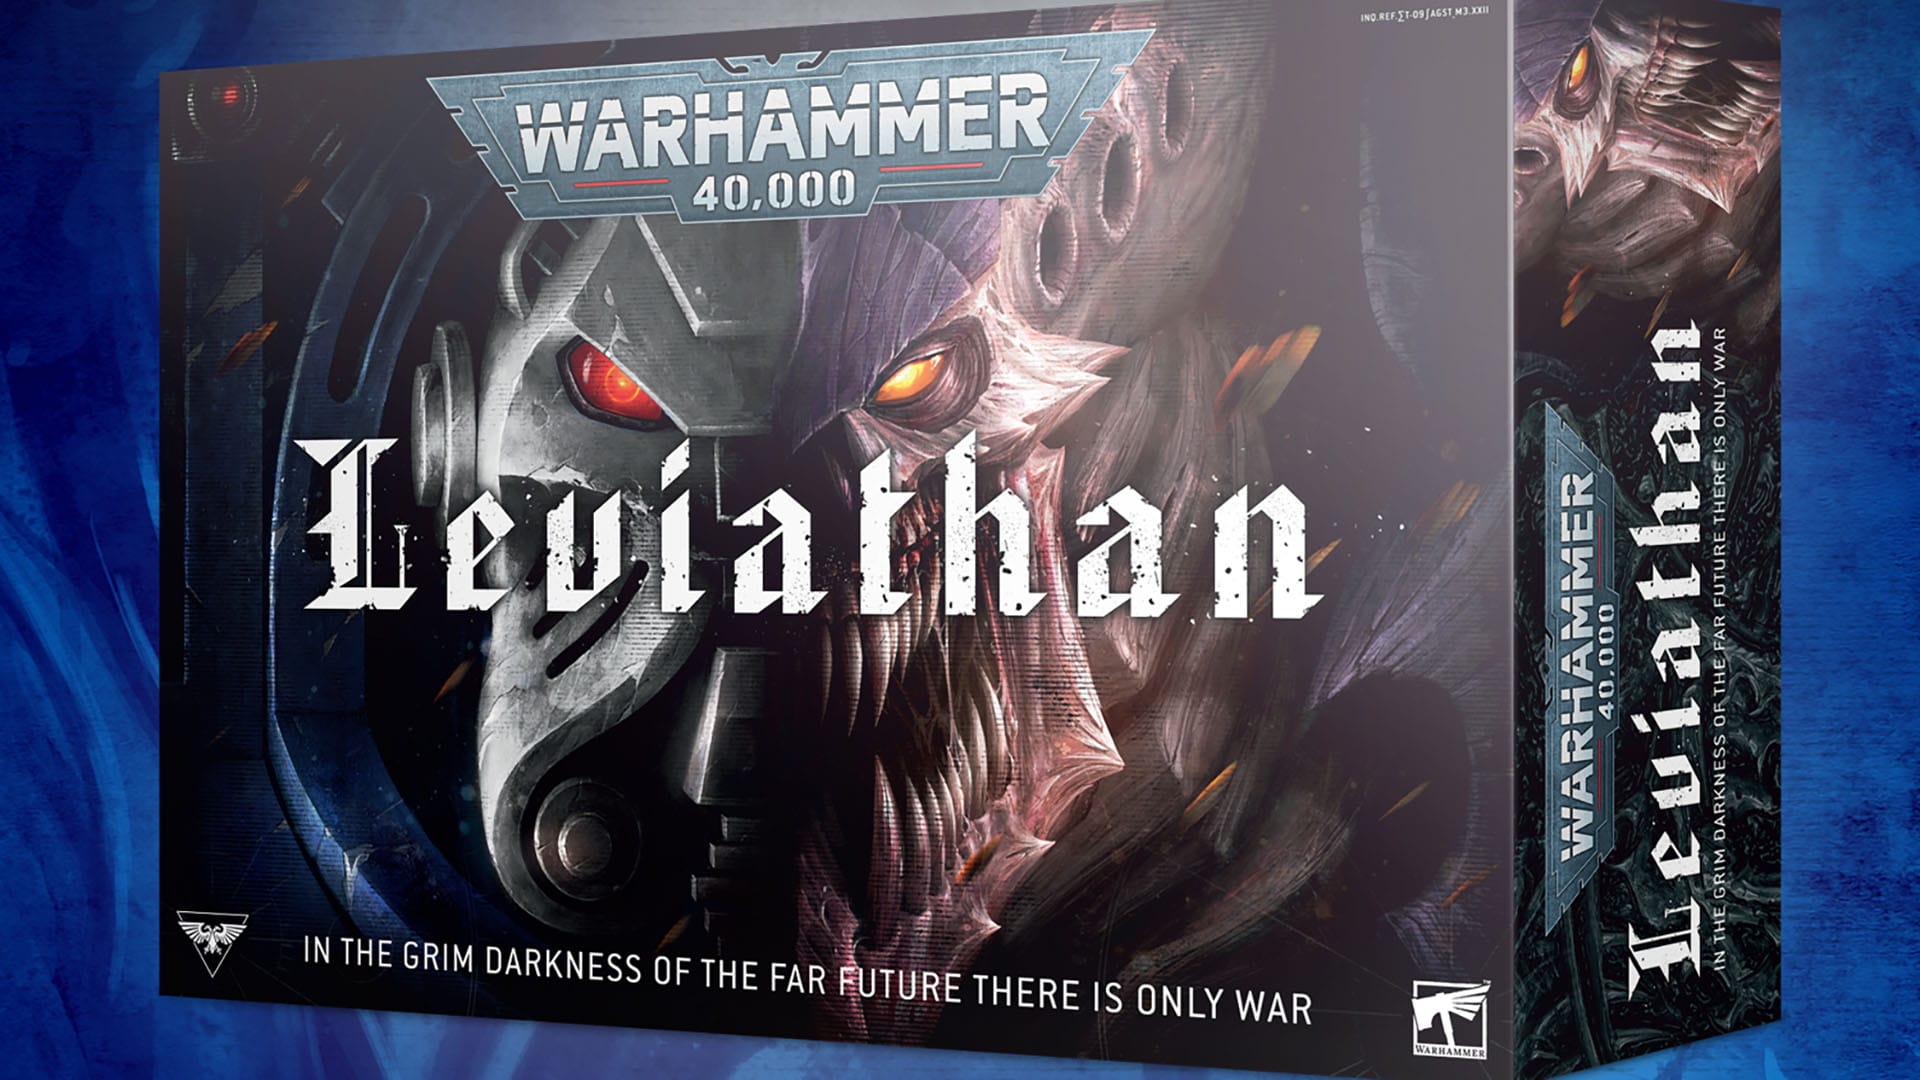 Warhammer 40K Reveals Massive Leviathan Boxed Set; Likely New